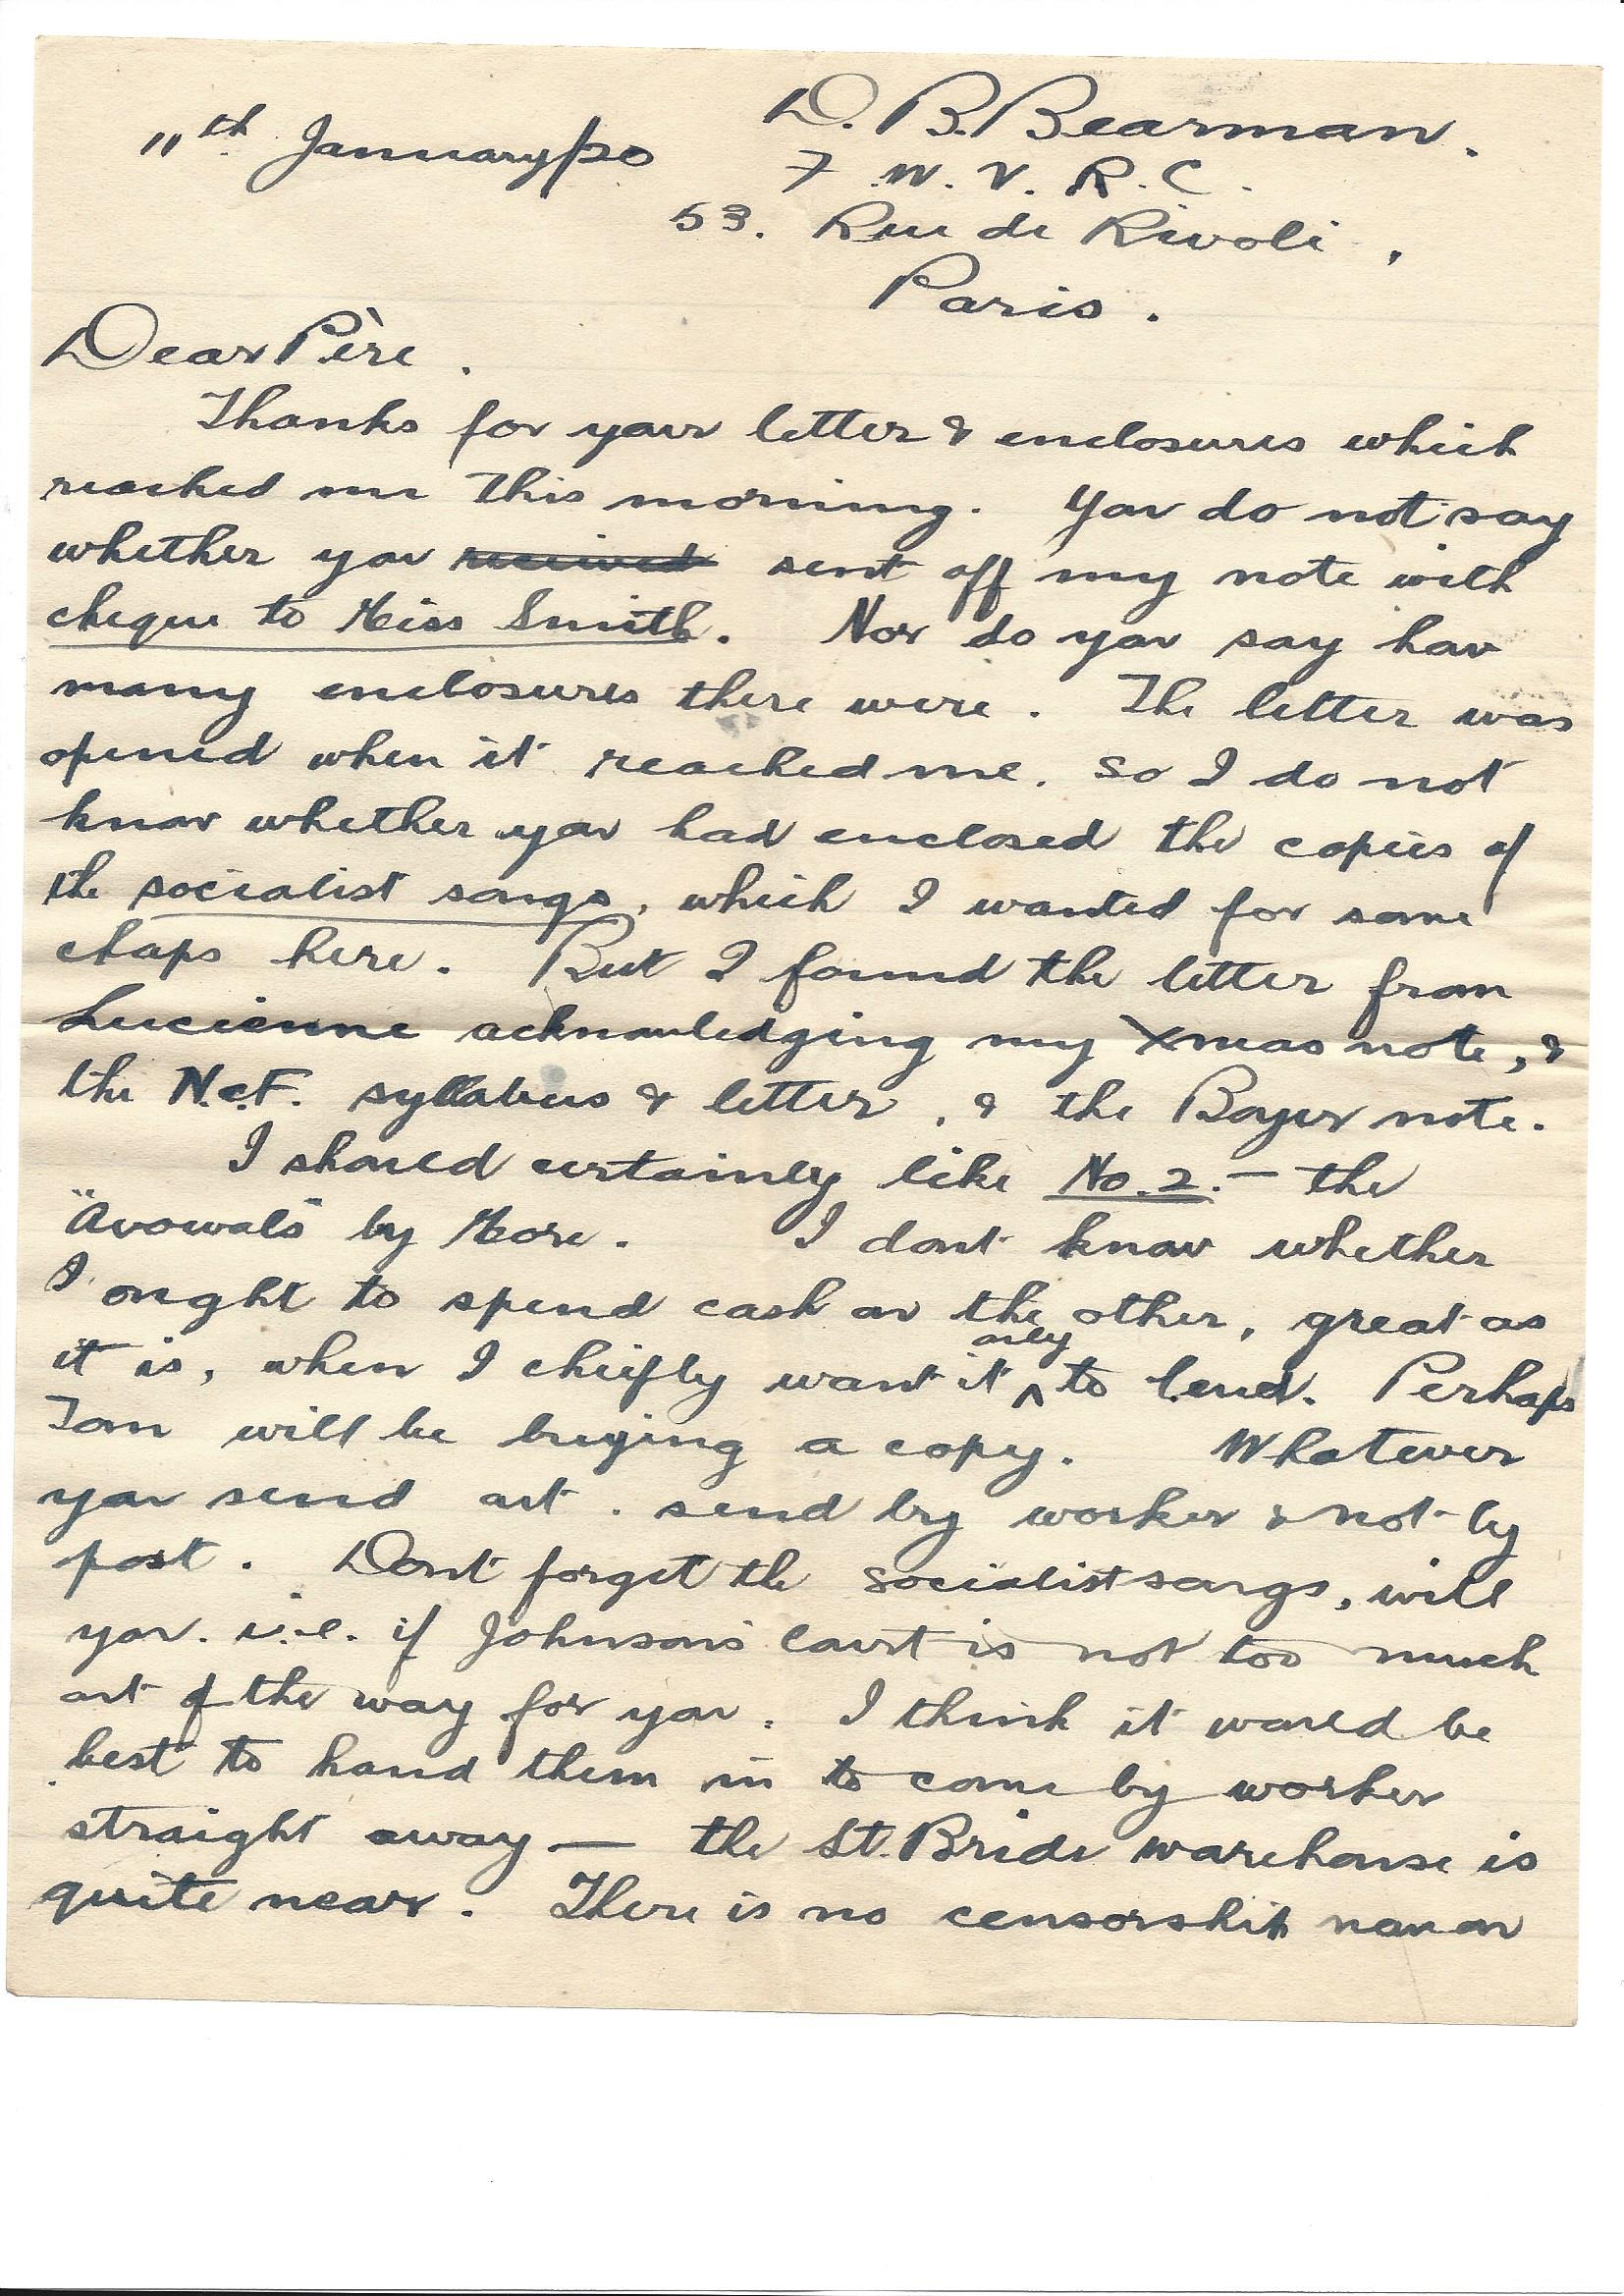 1920-01-11 page 2 letter by Donald Bearman